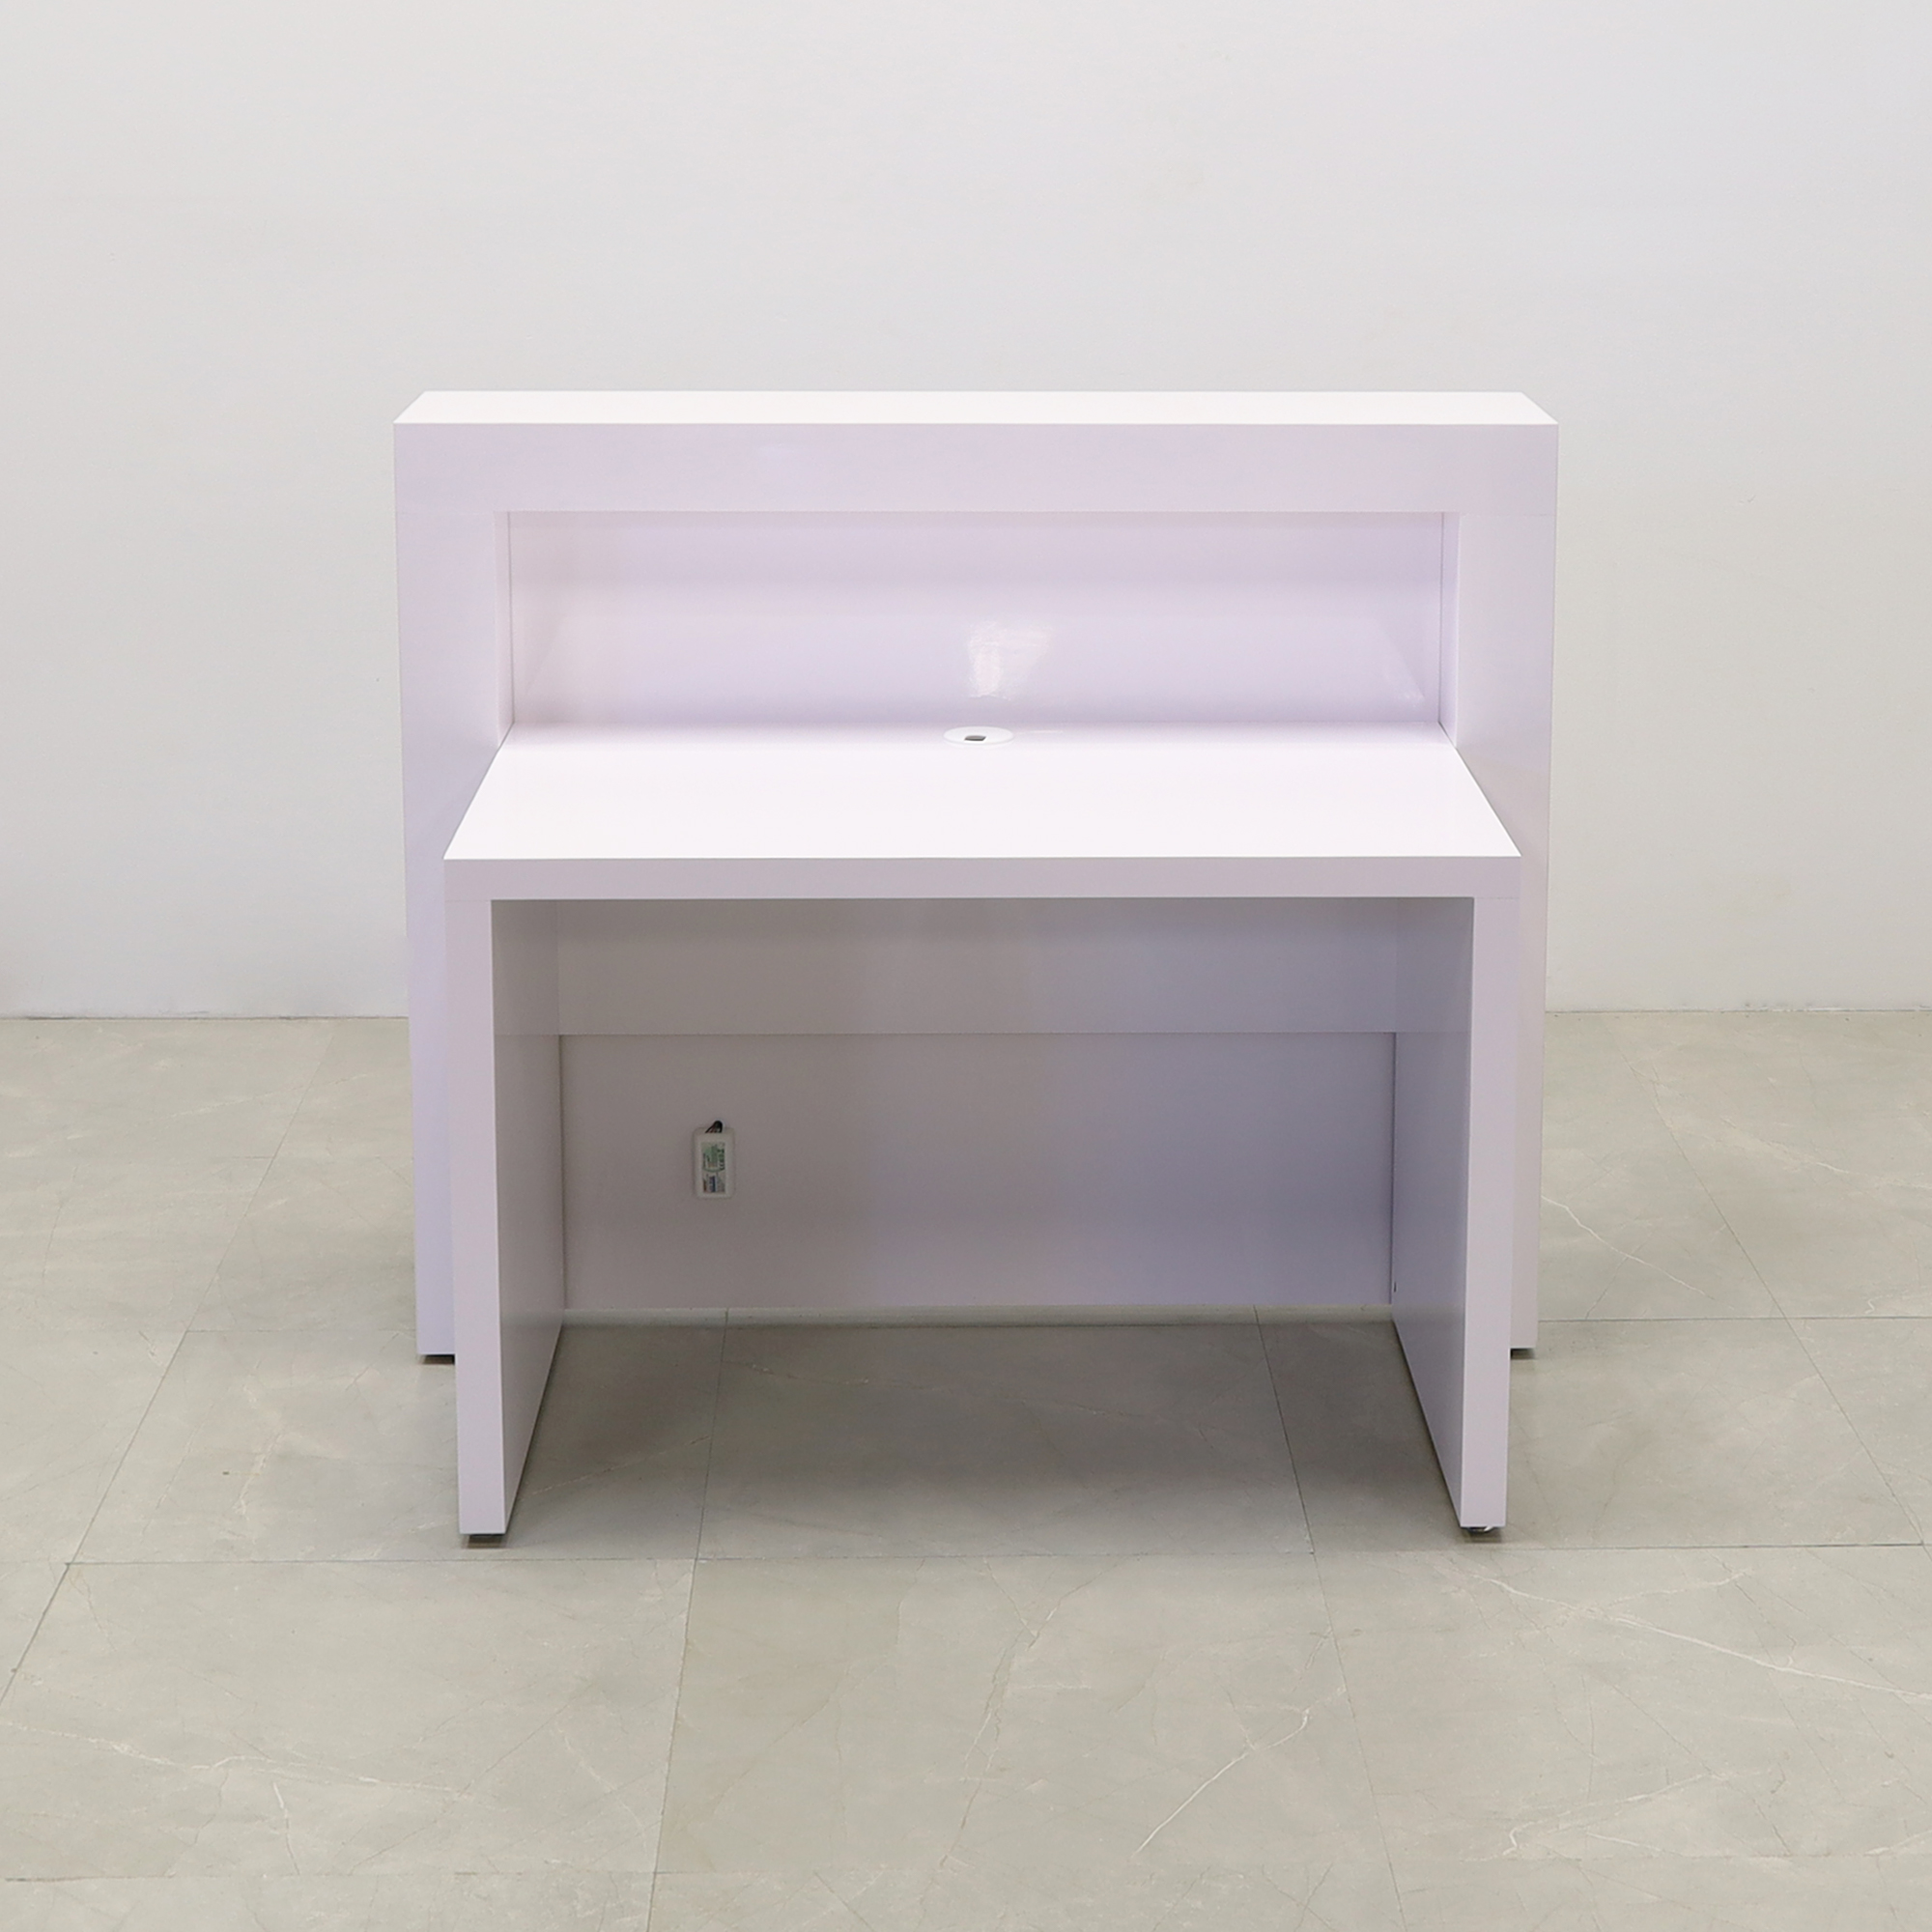 48-inch New York Straight Reception Desk in white gloss laminate finish, with multi-colored LED, shown here.